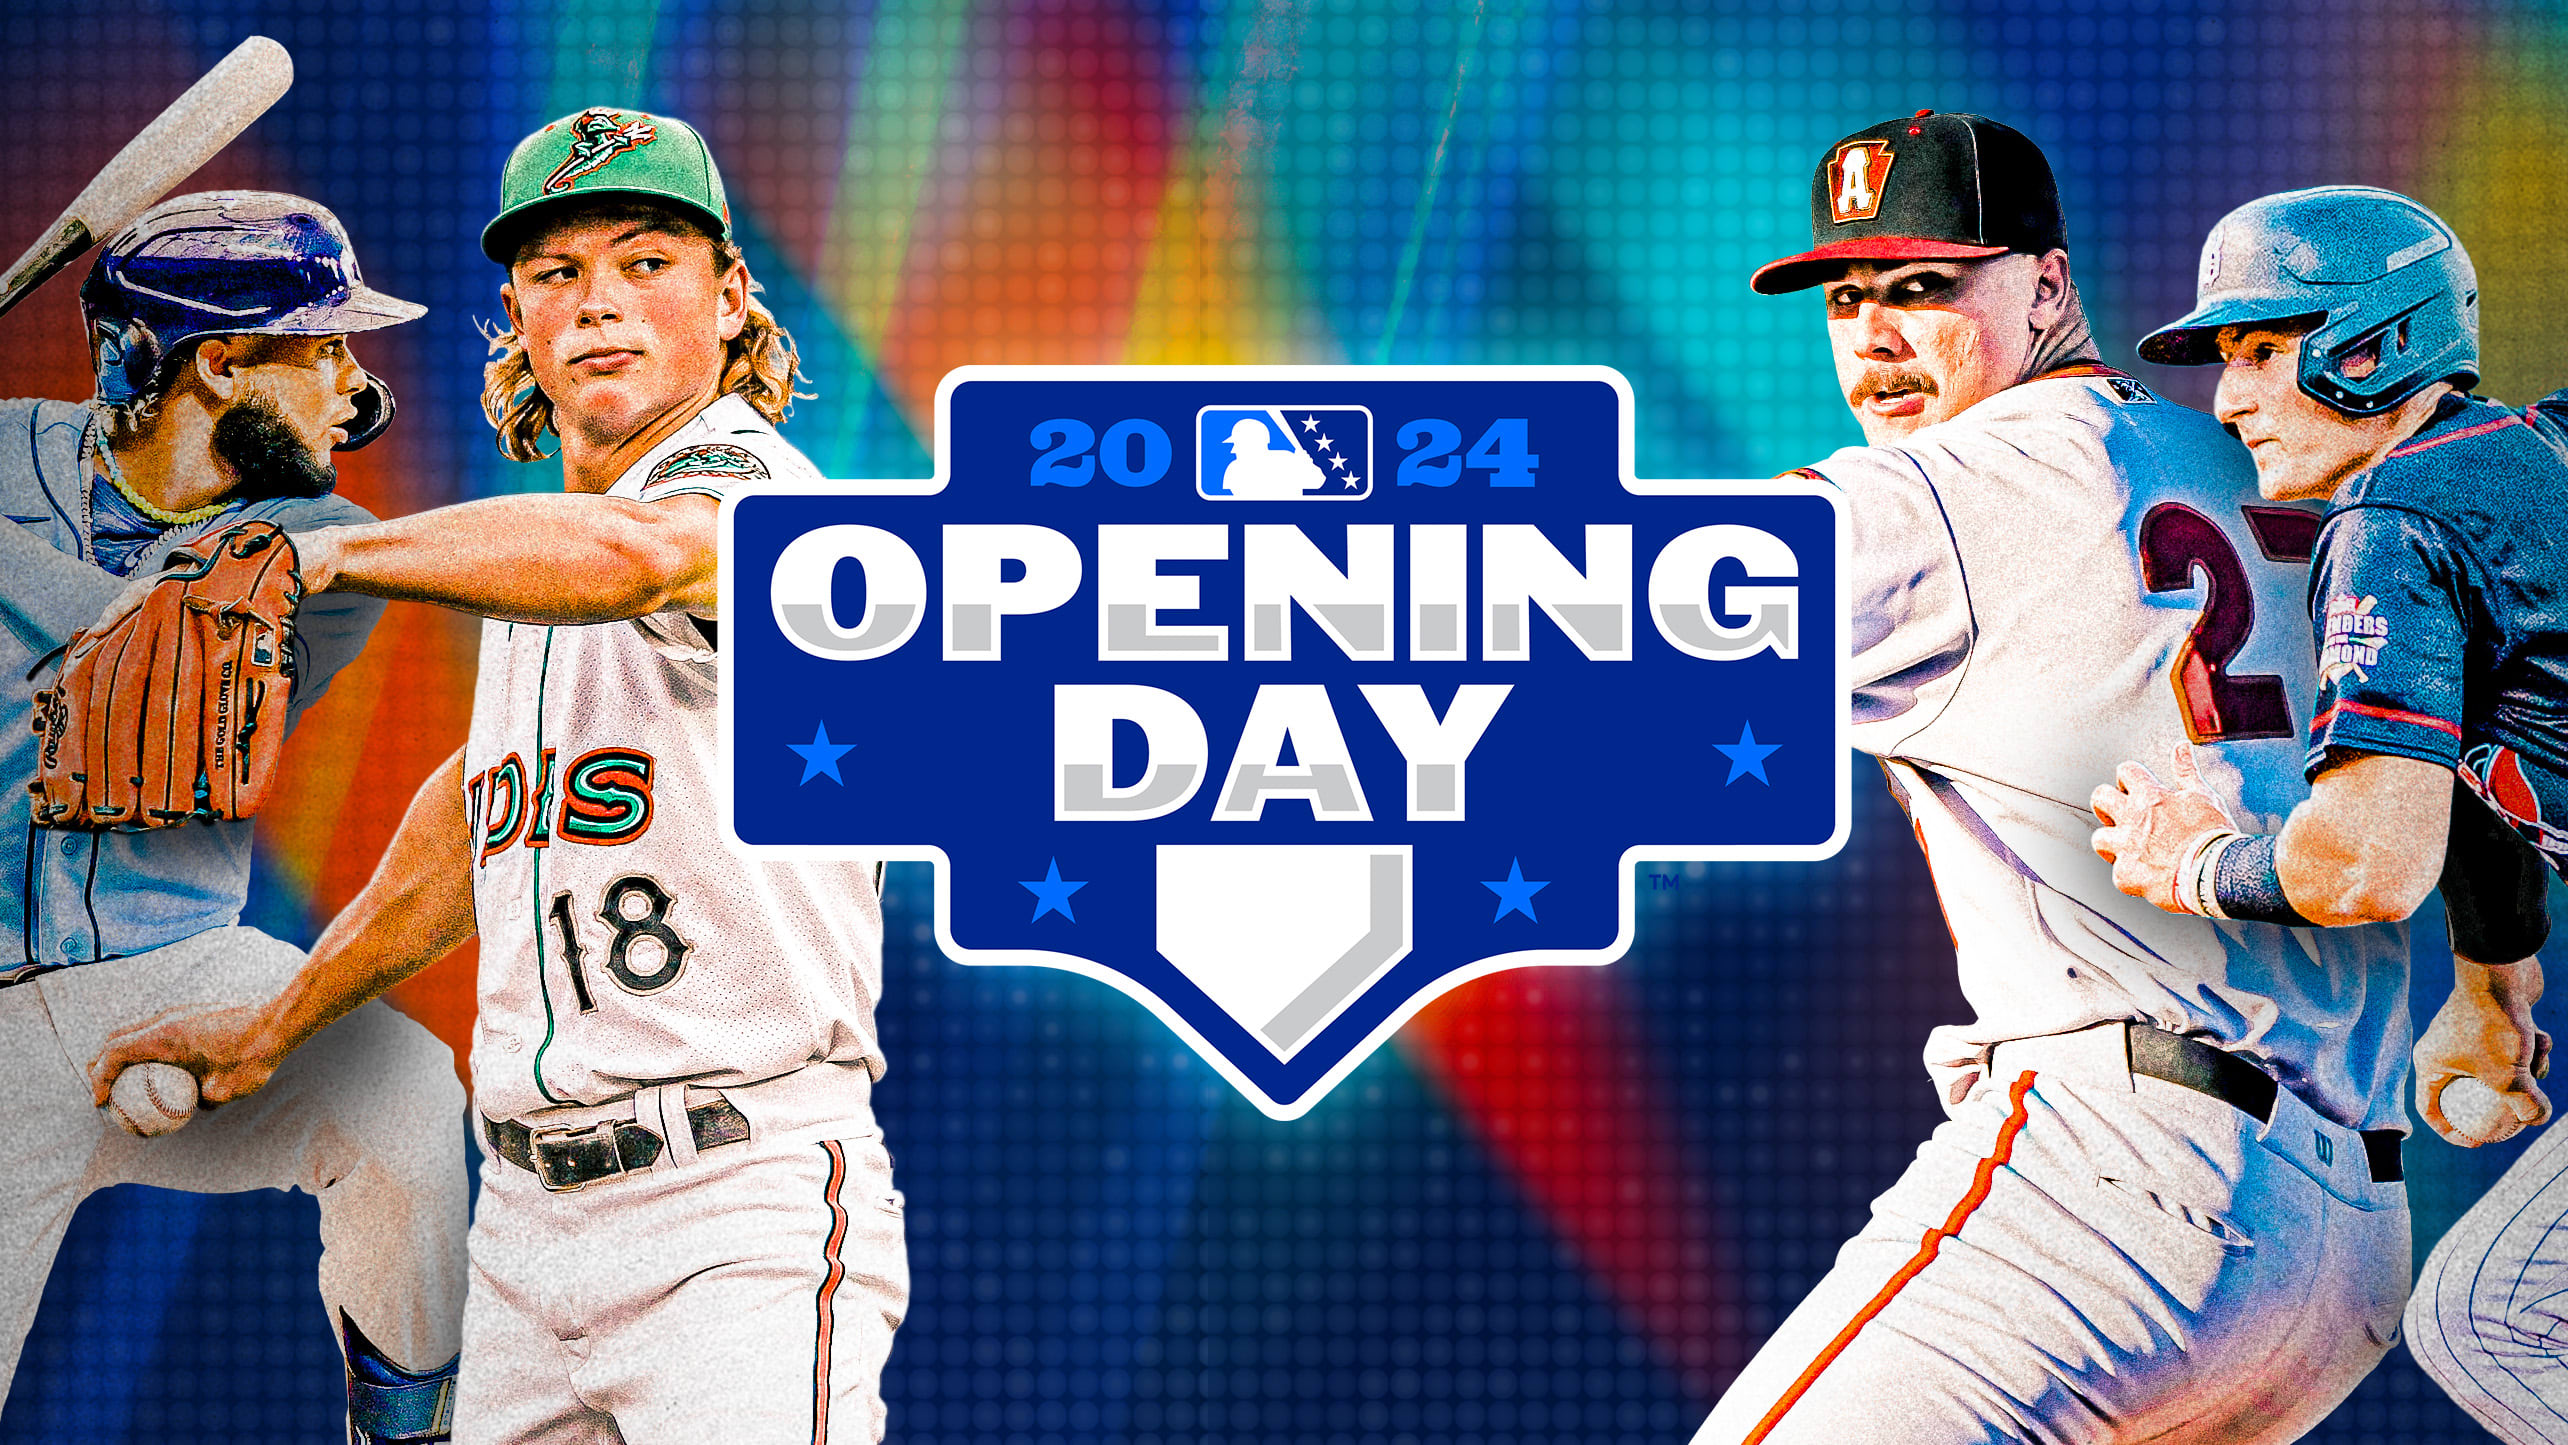 It's Opening Day in Triple-A for Jackson Holliday, Paul Skenes and other prospects